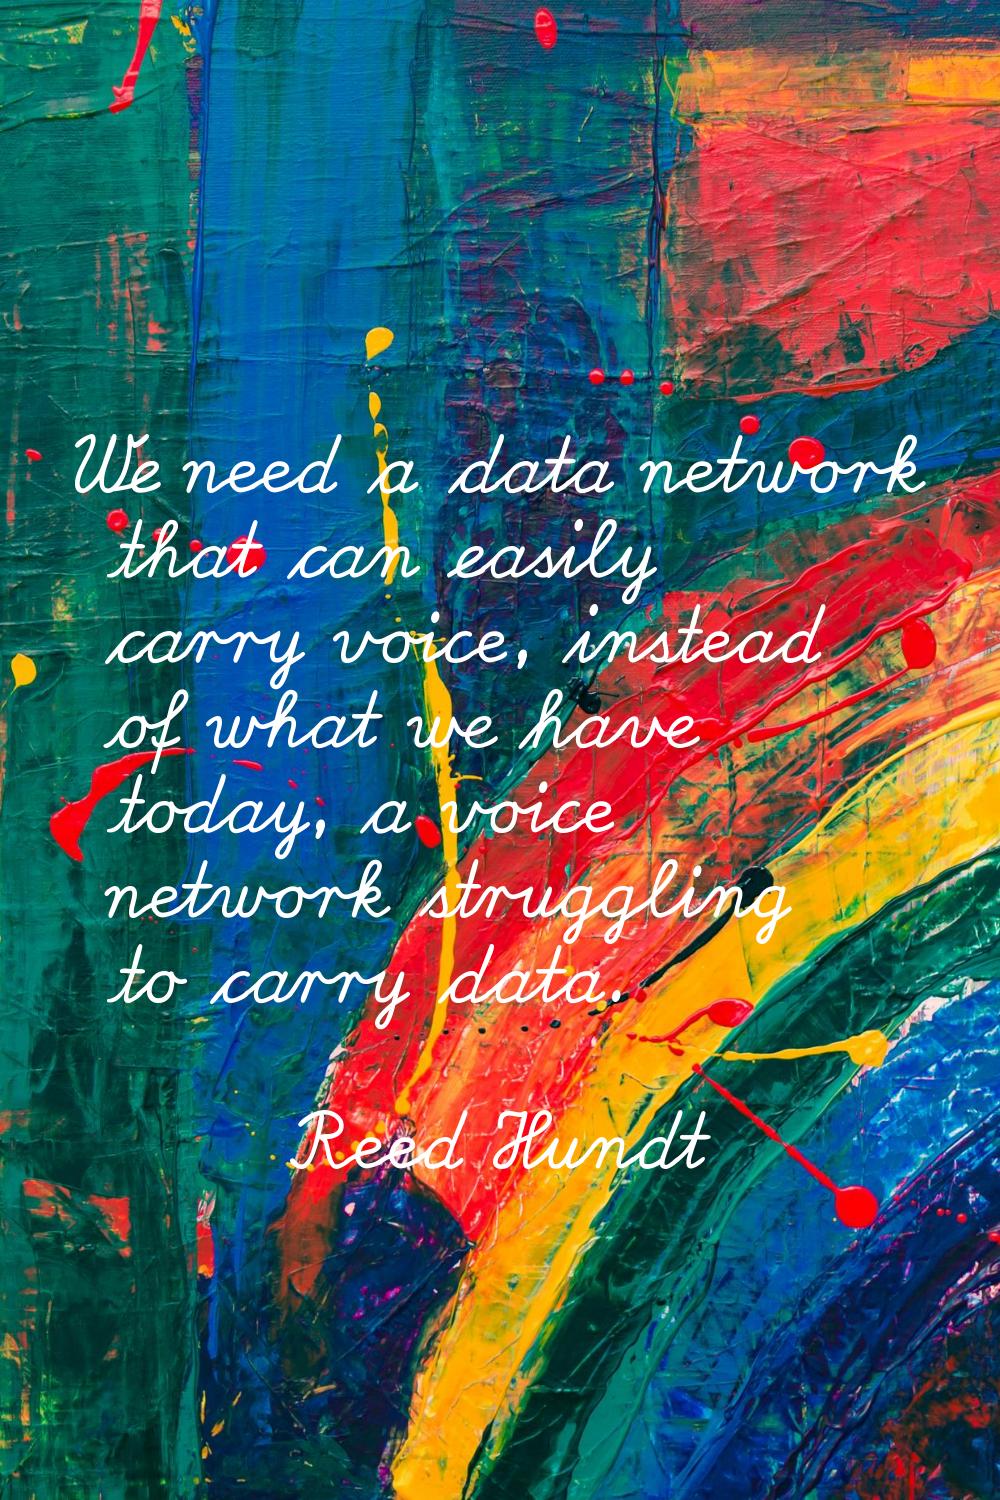 We need a data network that can easily carry voice, instead of what we have today, a voice network 